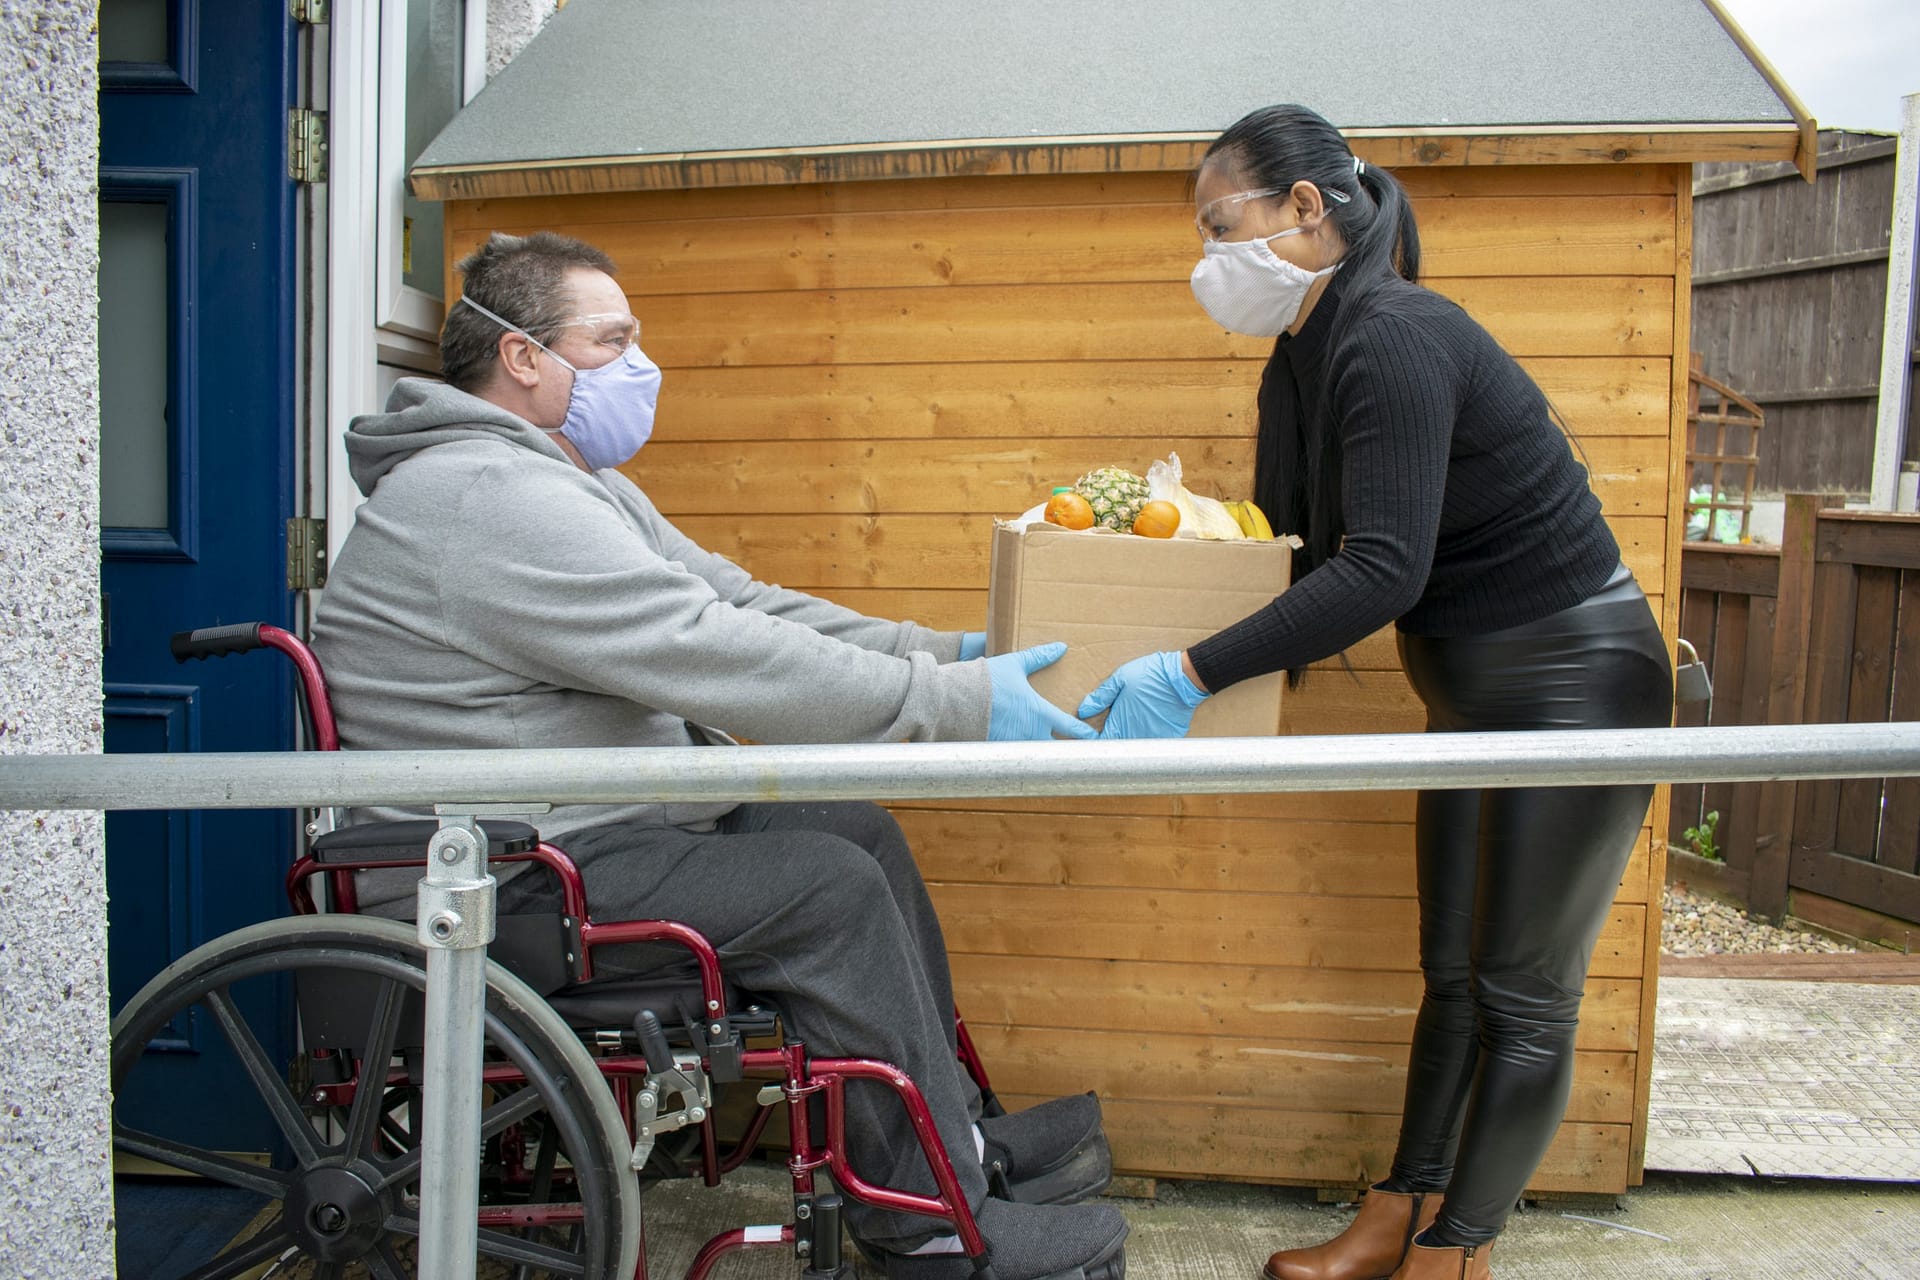 Helper Delivering Food to a Disabled Man in Quarantine During Covid19 Coronavirus Pandemic